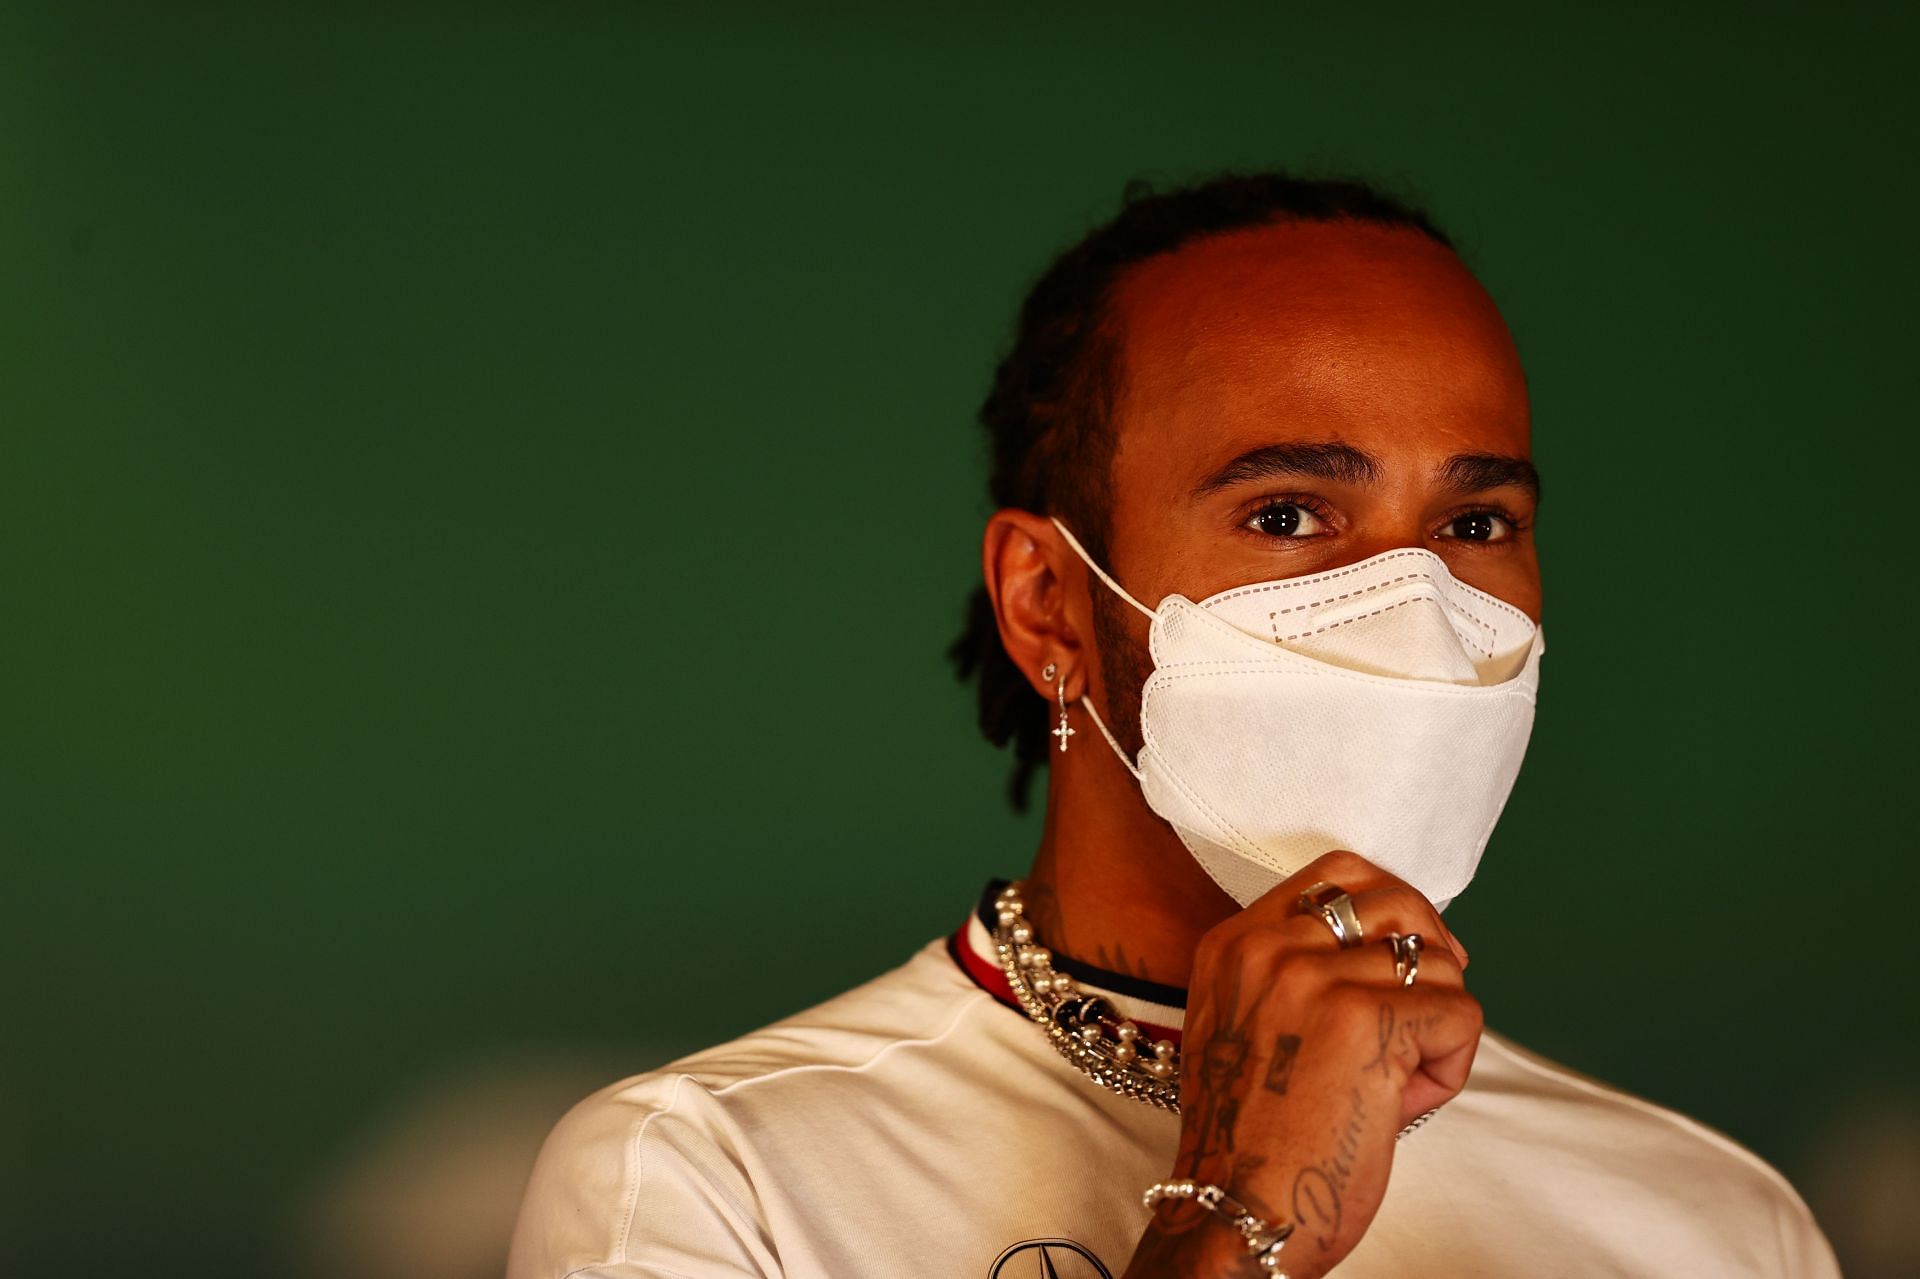 Lewis Hamilton looks on in the paddock during 2021 Qatar Grand Prix free practice. (Photo by Mark Thompson/Getty Images)